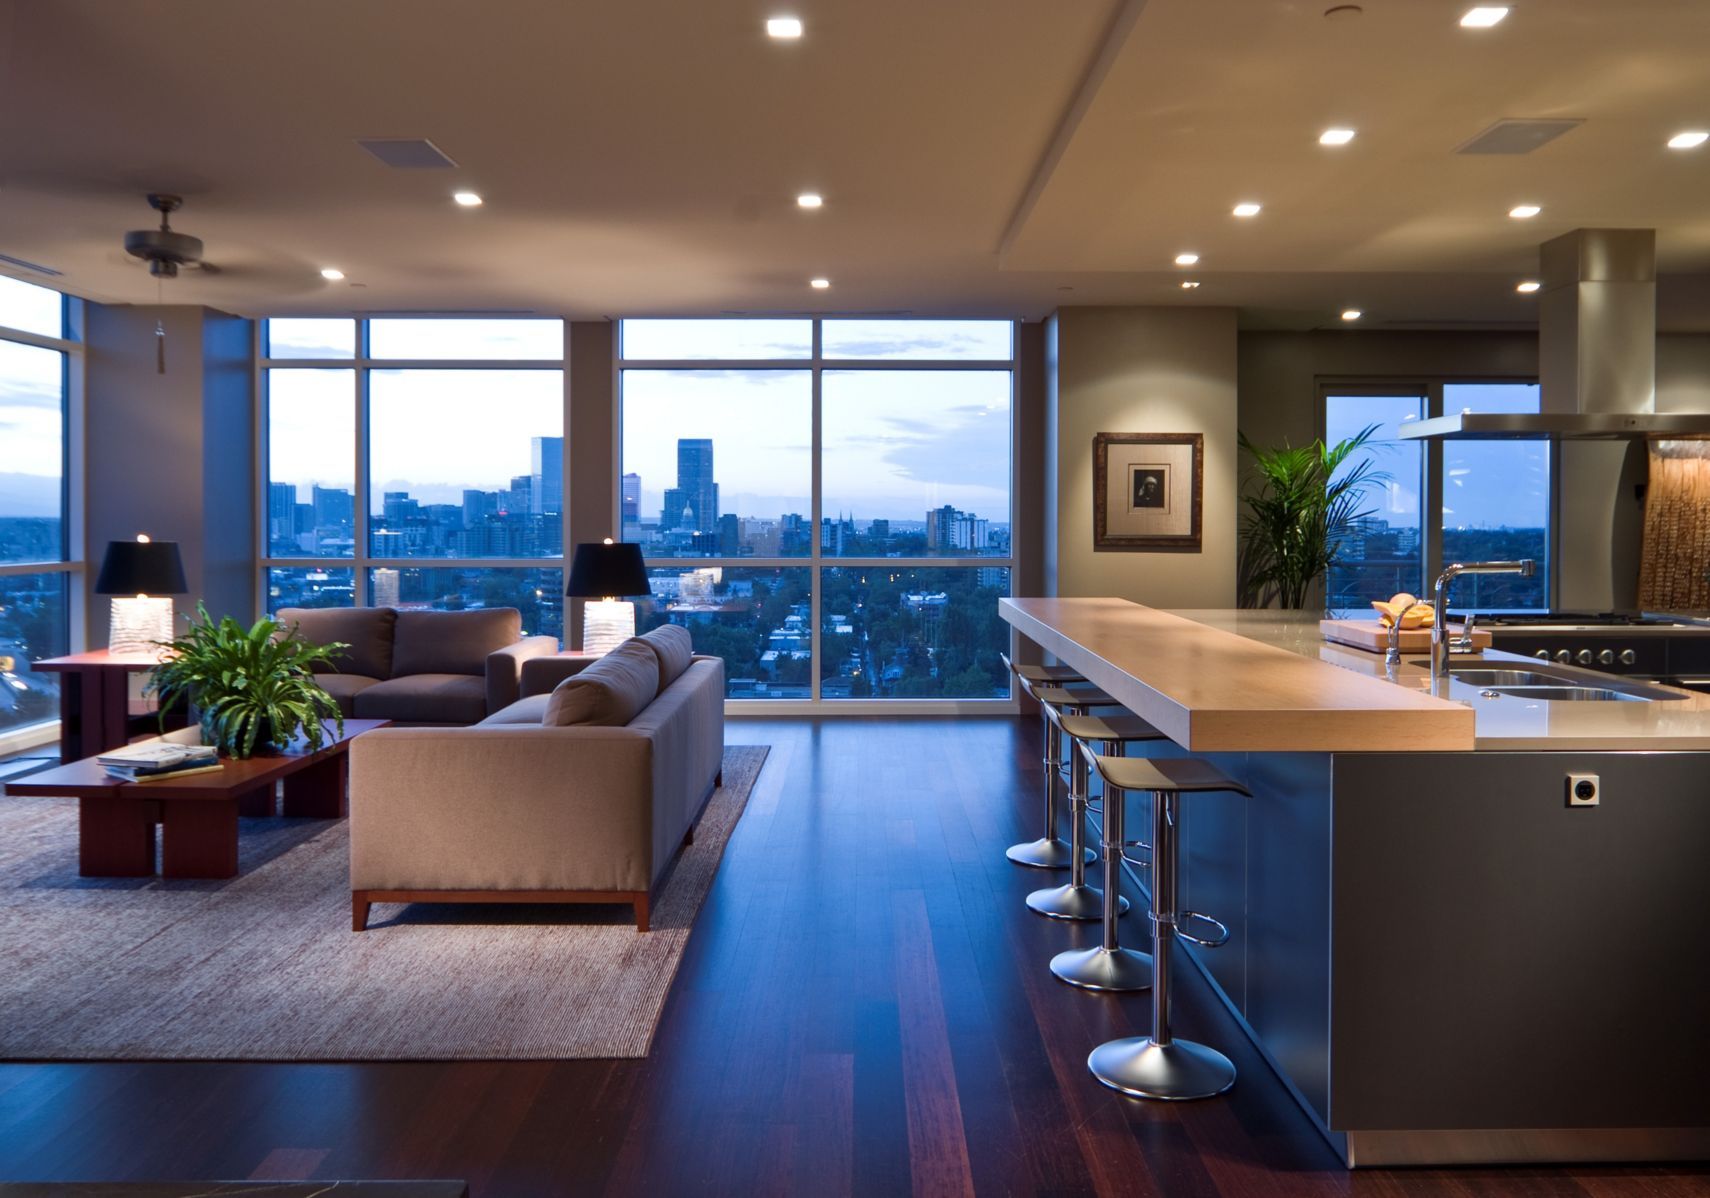 Be Smart When Looking for Luxury Apartments for Rent